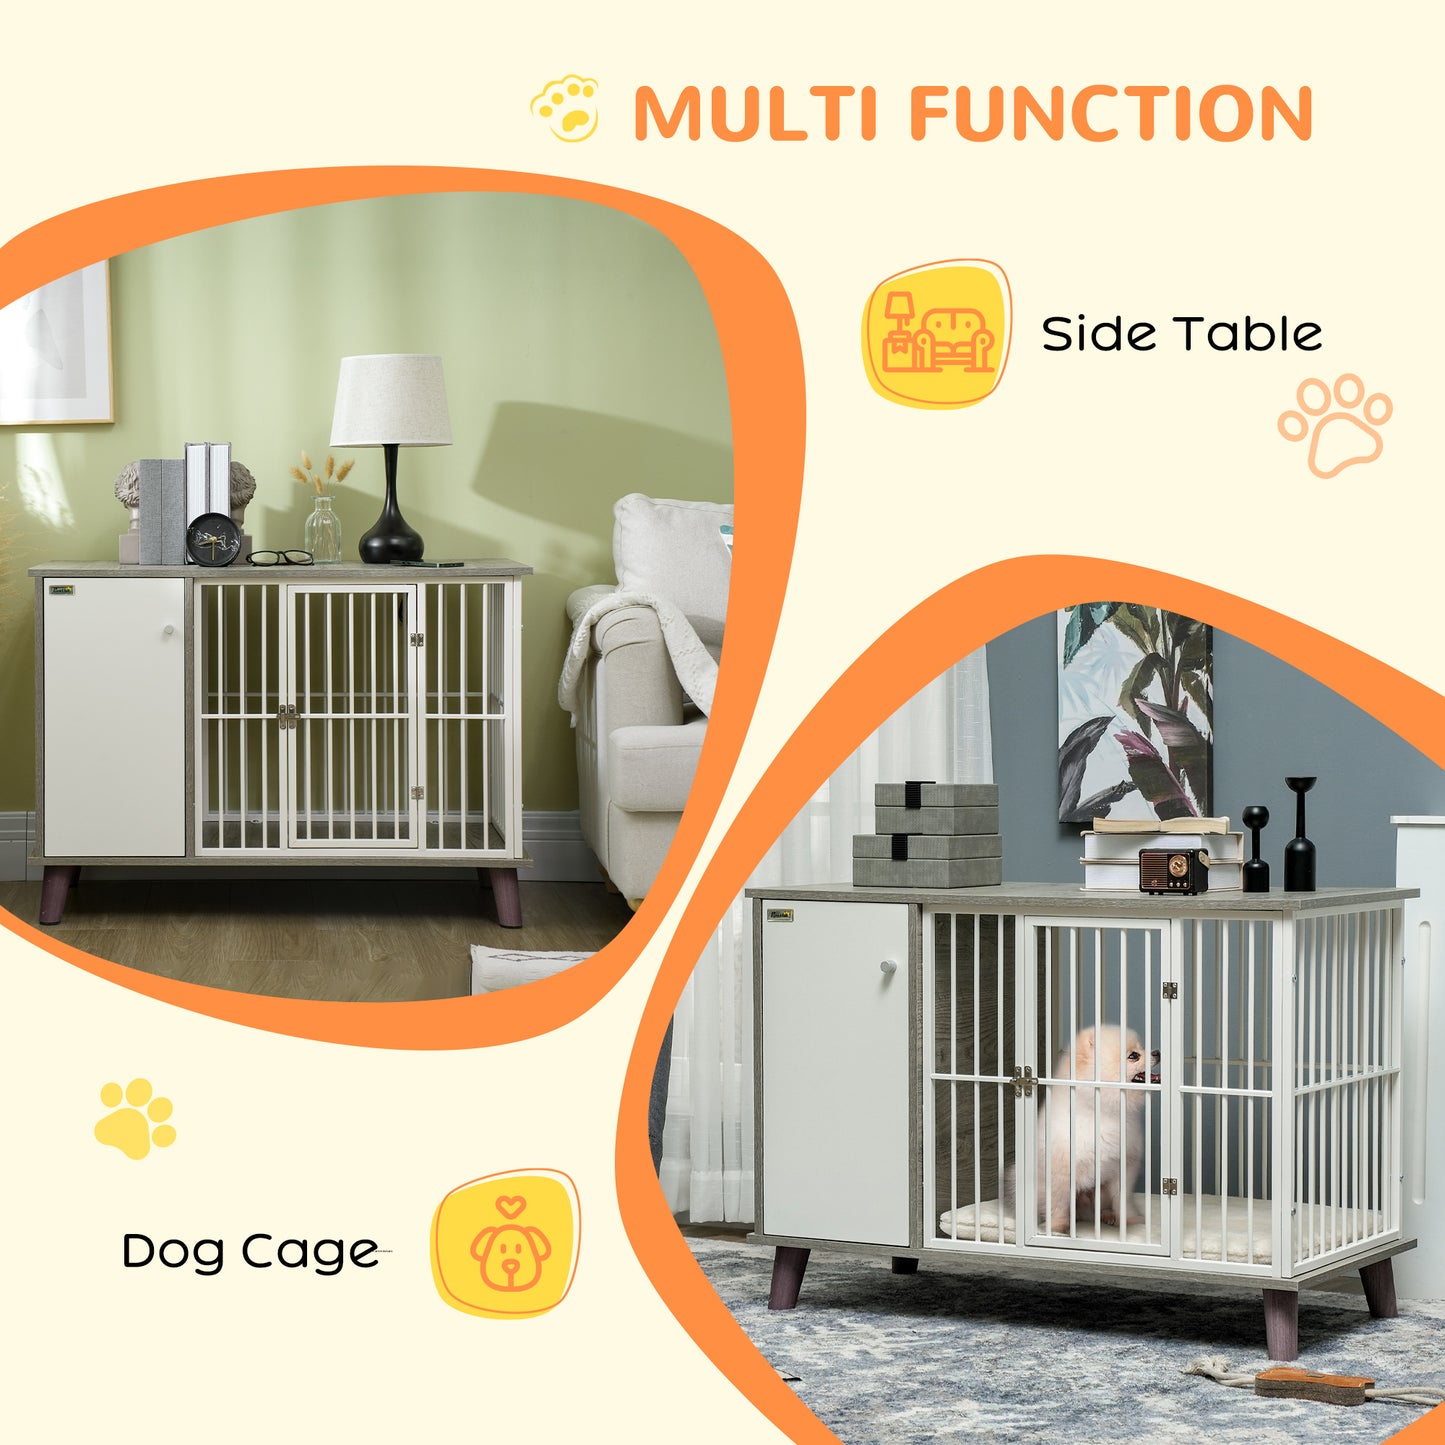 PawHut Dog Crate Furniture, Indoor Pet Kennel Cage, Top End Table w/ Soft Cushion, Lockable Door, for Small Dogs, 98 x 48 x 70.5 cm - Grey